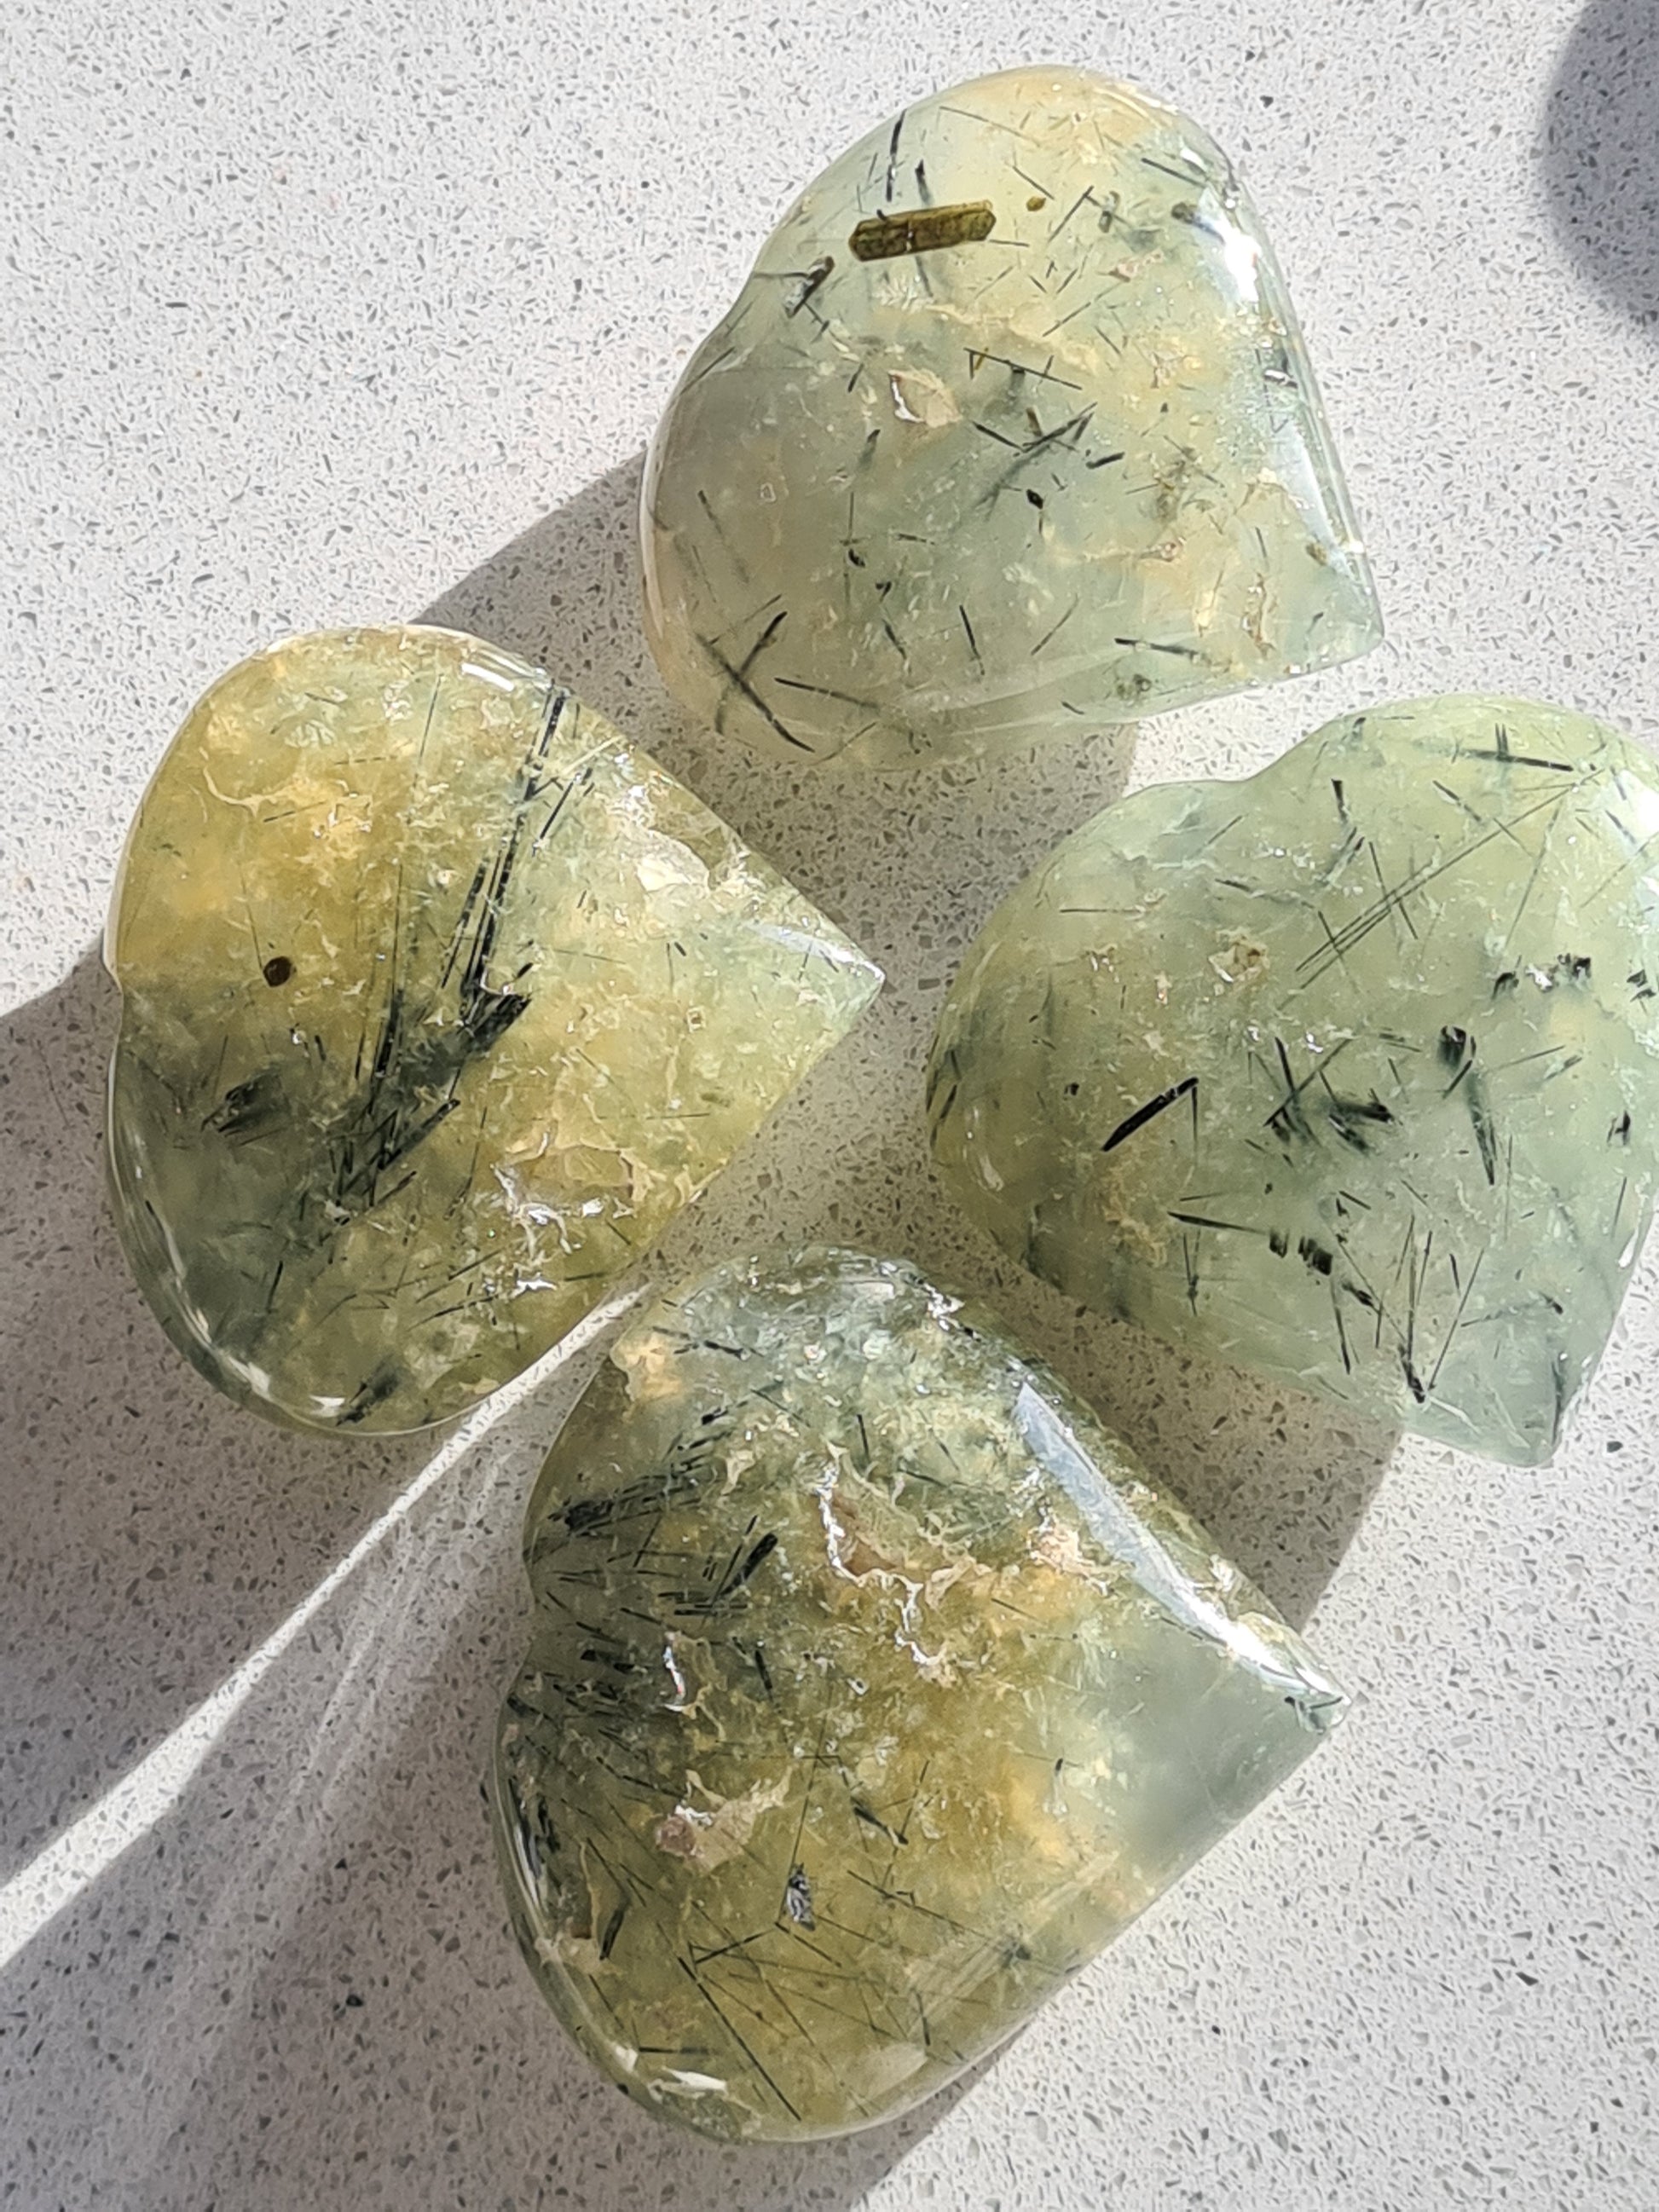 Natural Green Prehnite Carved Polished Heart Crystals with Epidote Inclusions. 
Four, photographed on a white quartz background in natural daylight.